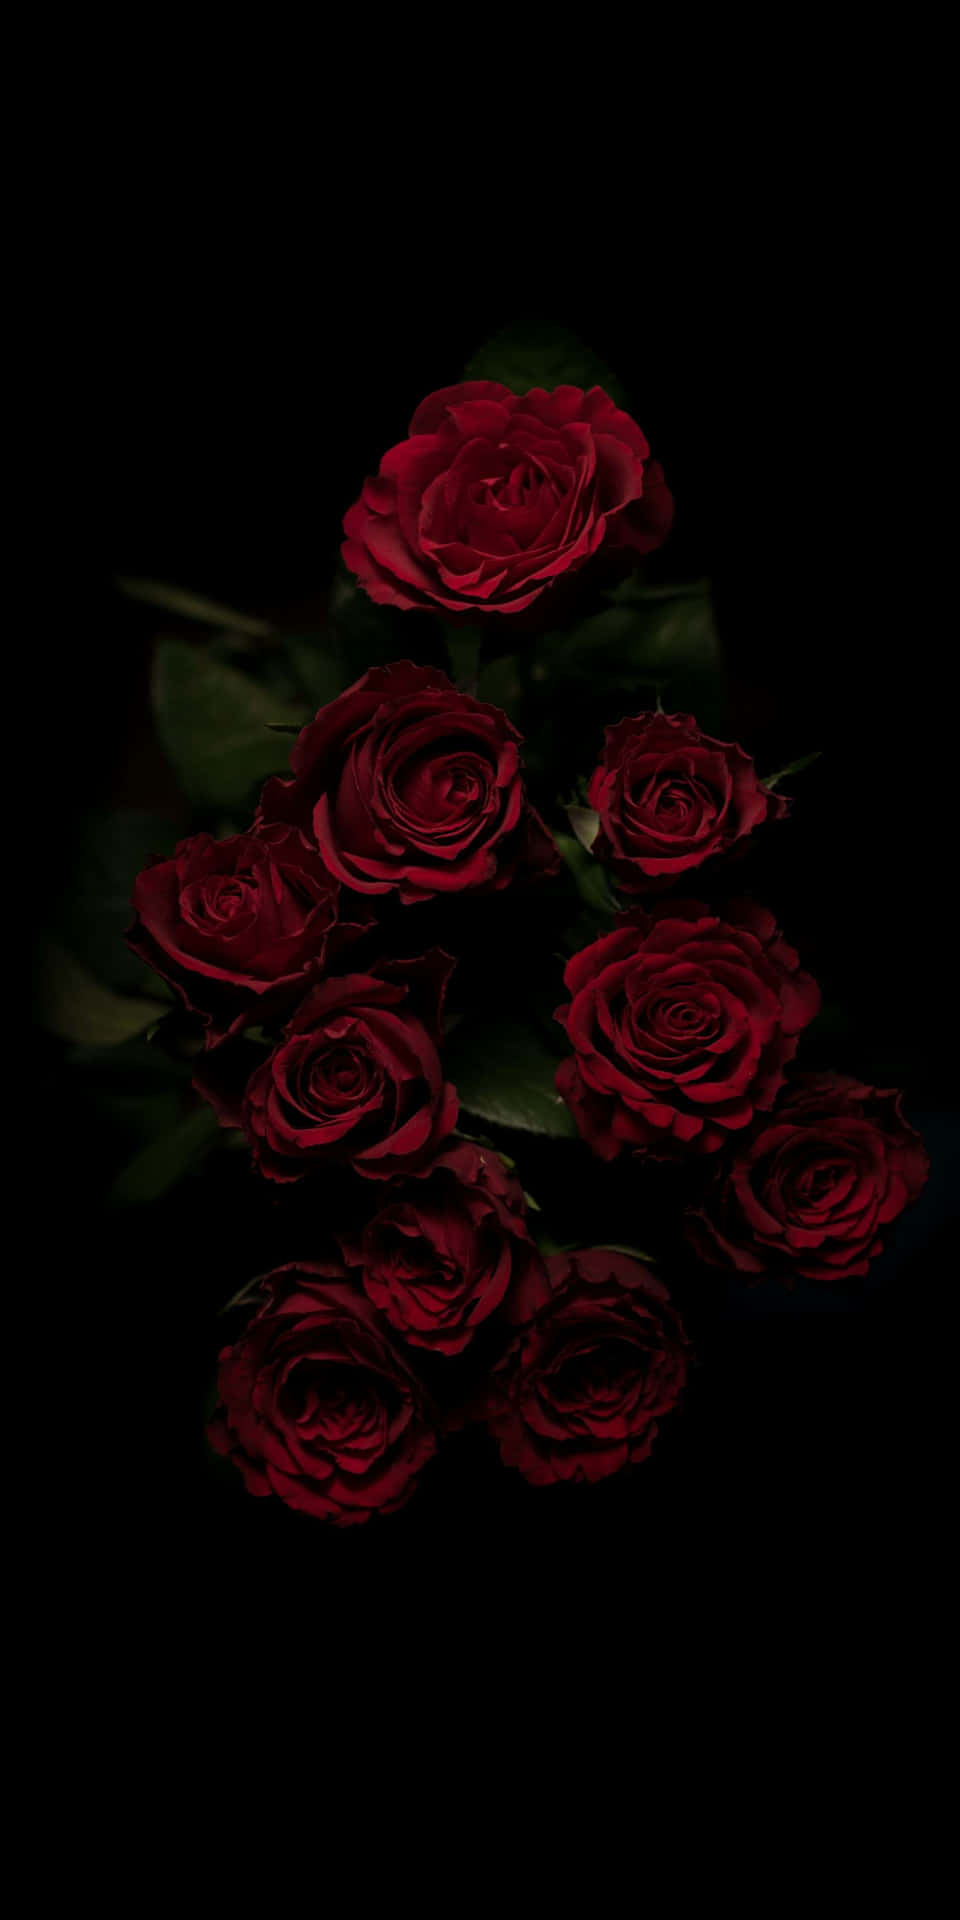 Look No Further. Find Comfort In The Dark Beauty Of A Black Rose. Background